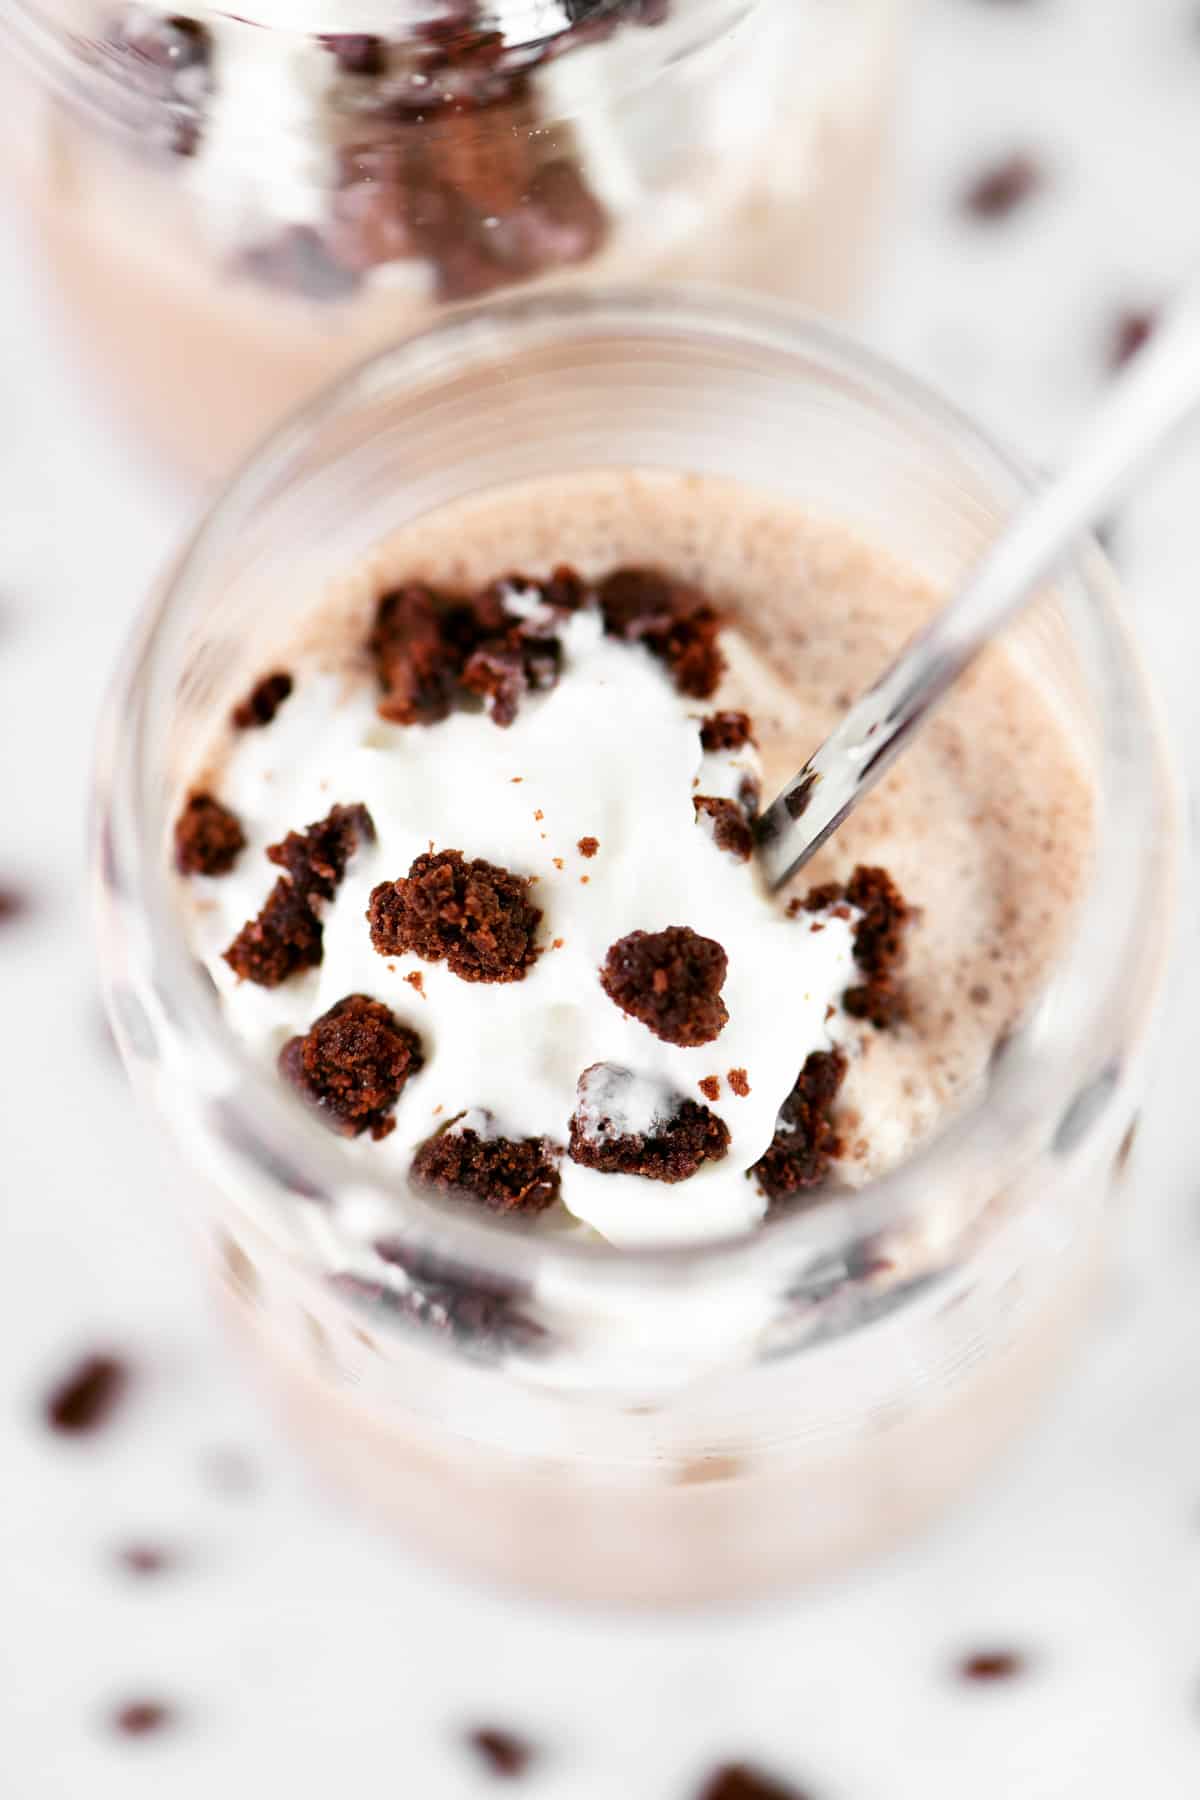 Showing inside a glass filled with a brownie milkshake.